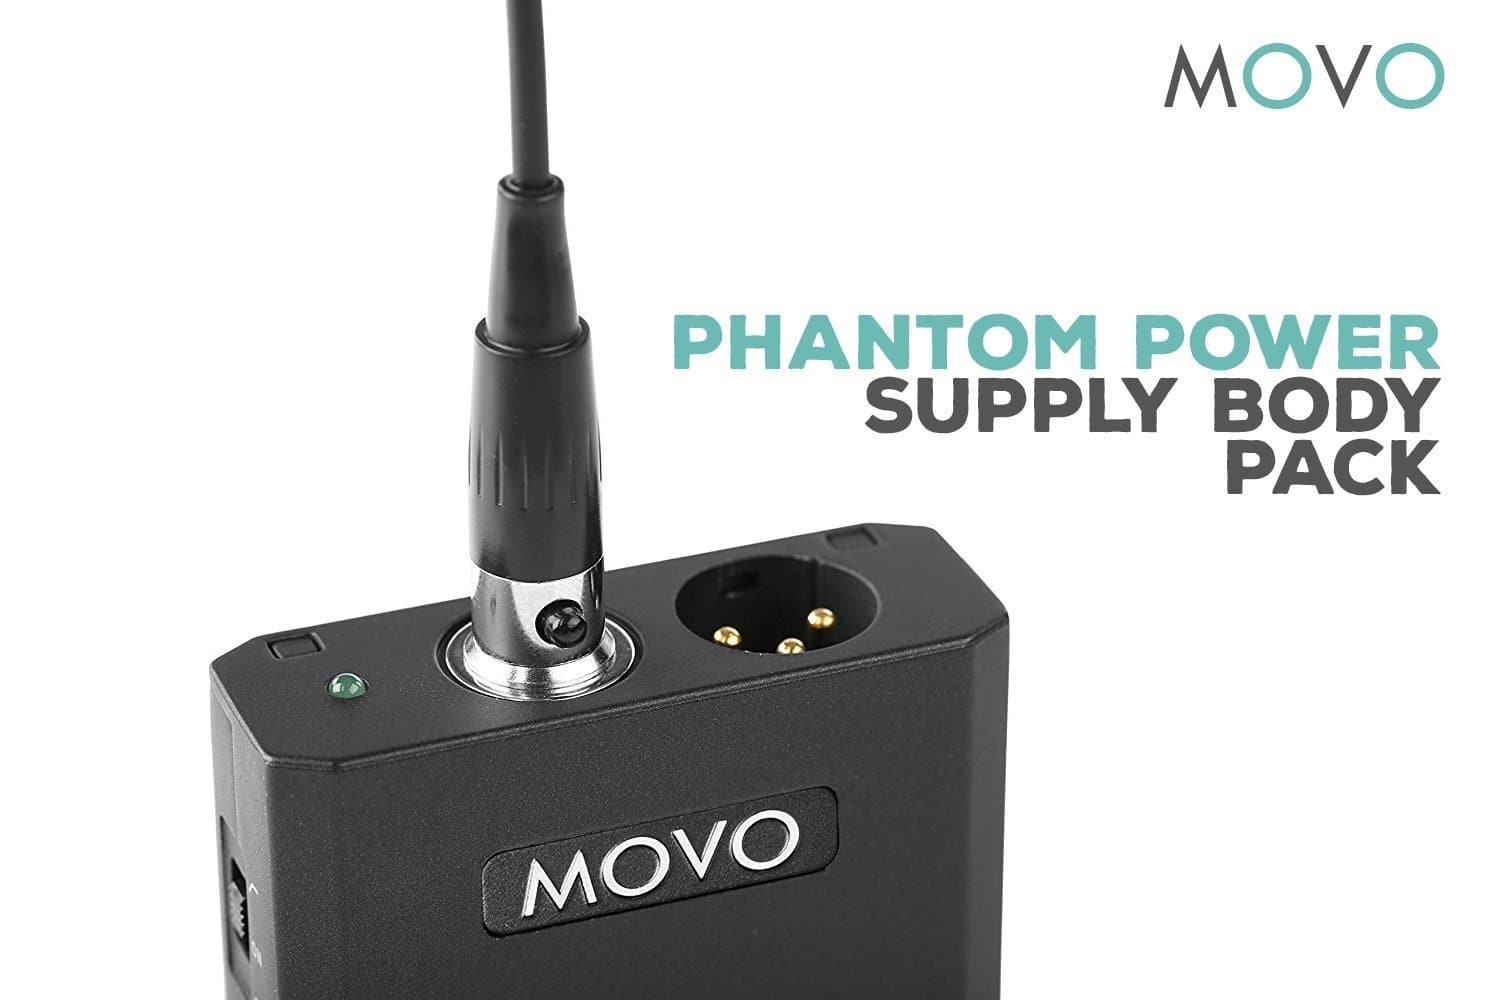 Movo Lv22od XLR Lavalier Omnidirectional Condenser Microphone with Phantom Power Supply Body Pack, 12mm Mic Capsule, Foam & Deadcat Windscreens